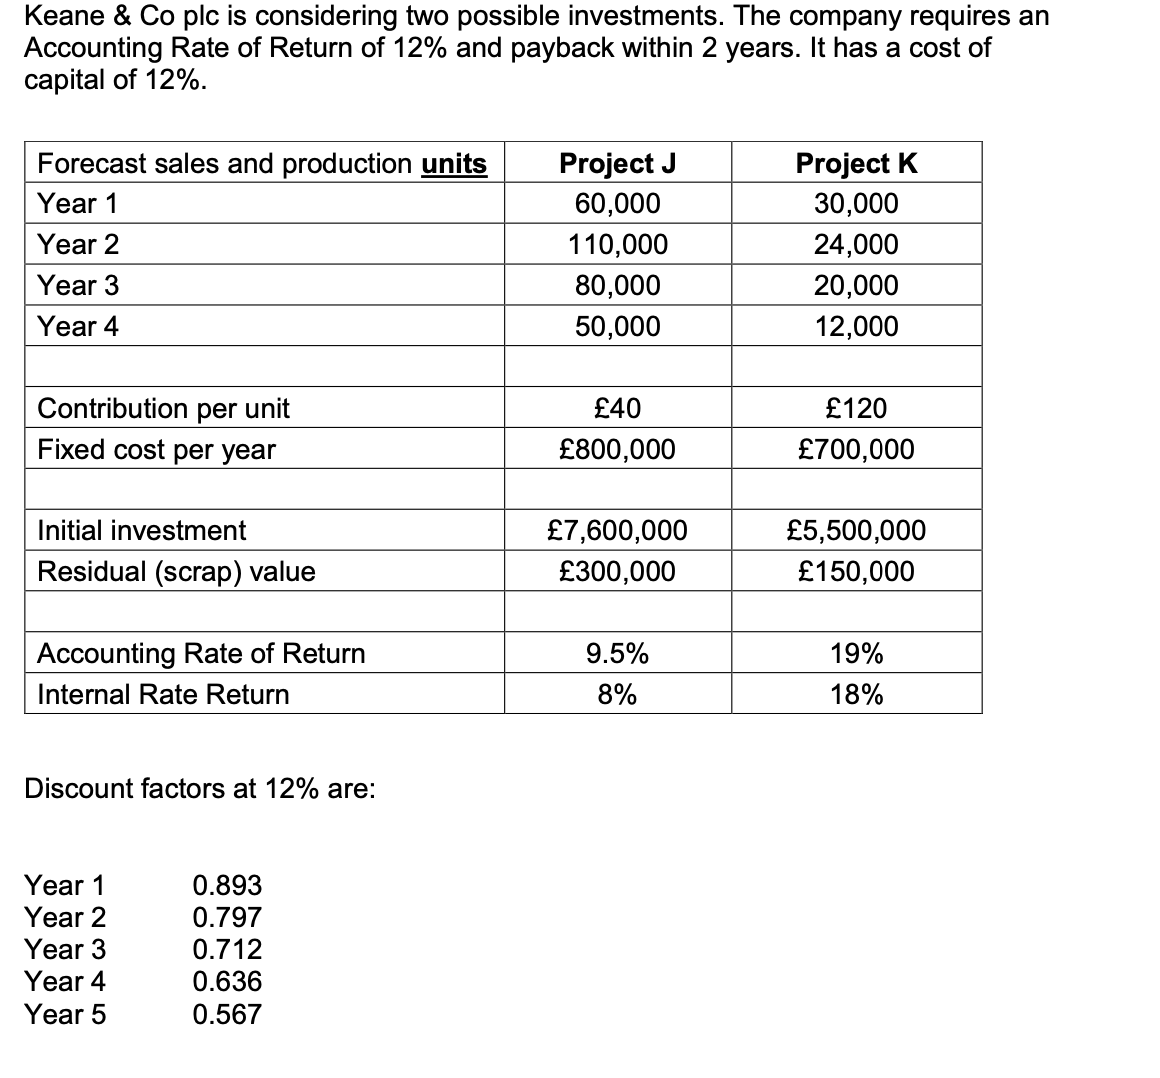 Keane & Co plc is considering two possible investments. The company requires an
Accounting Rate of Return of 12% and payback within 2 years. It has a cost of
capital of 12%.
Forecast sales and production units
Year 1
Year 2
Year 3
Year 4
Contribution per unit
Fixed cost per year
Initial investment
Residual (scrap) value
Accounting Rate of Return
Internal Rate Return
Discount factors at 12% are:
Year 1
Year 2
Year 3
Year 4
Year 5
0.893
0.797
0.712
0.636
0.567
Project J
60,000
110,000
80,000
50,000
£40
£800,000
£7,600,000
£300,000
9.5%
8%
Project K
30,000
24,000
20,000
12,000
£120
£700,000
£5,500,000
£150,000
19%
18%